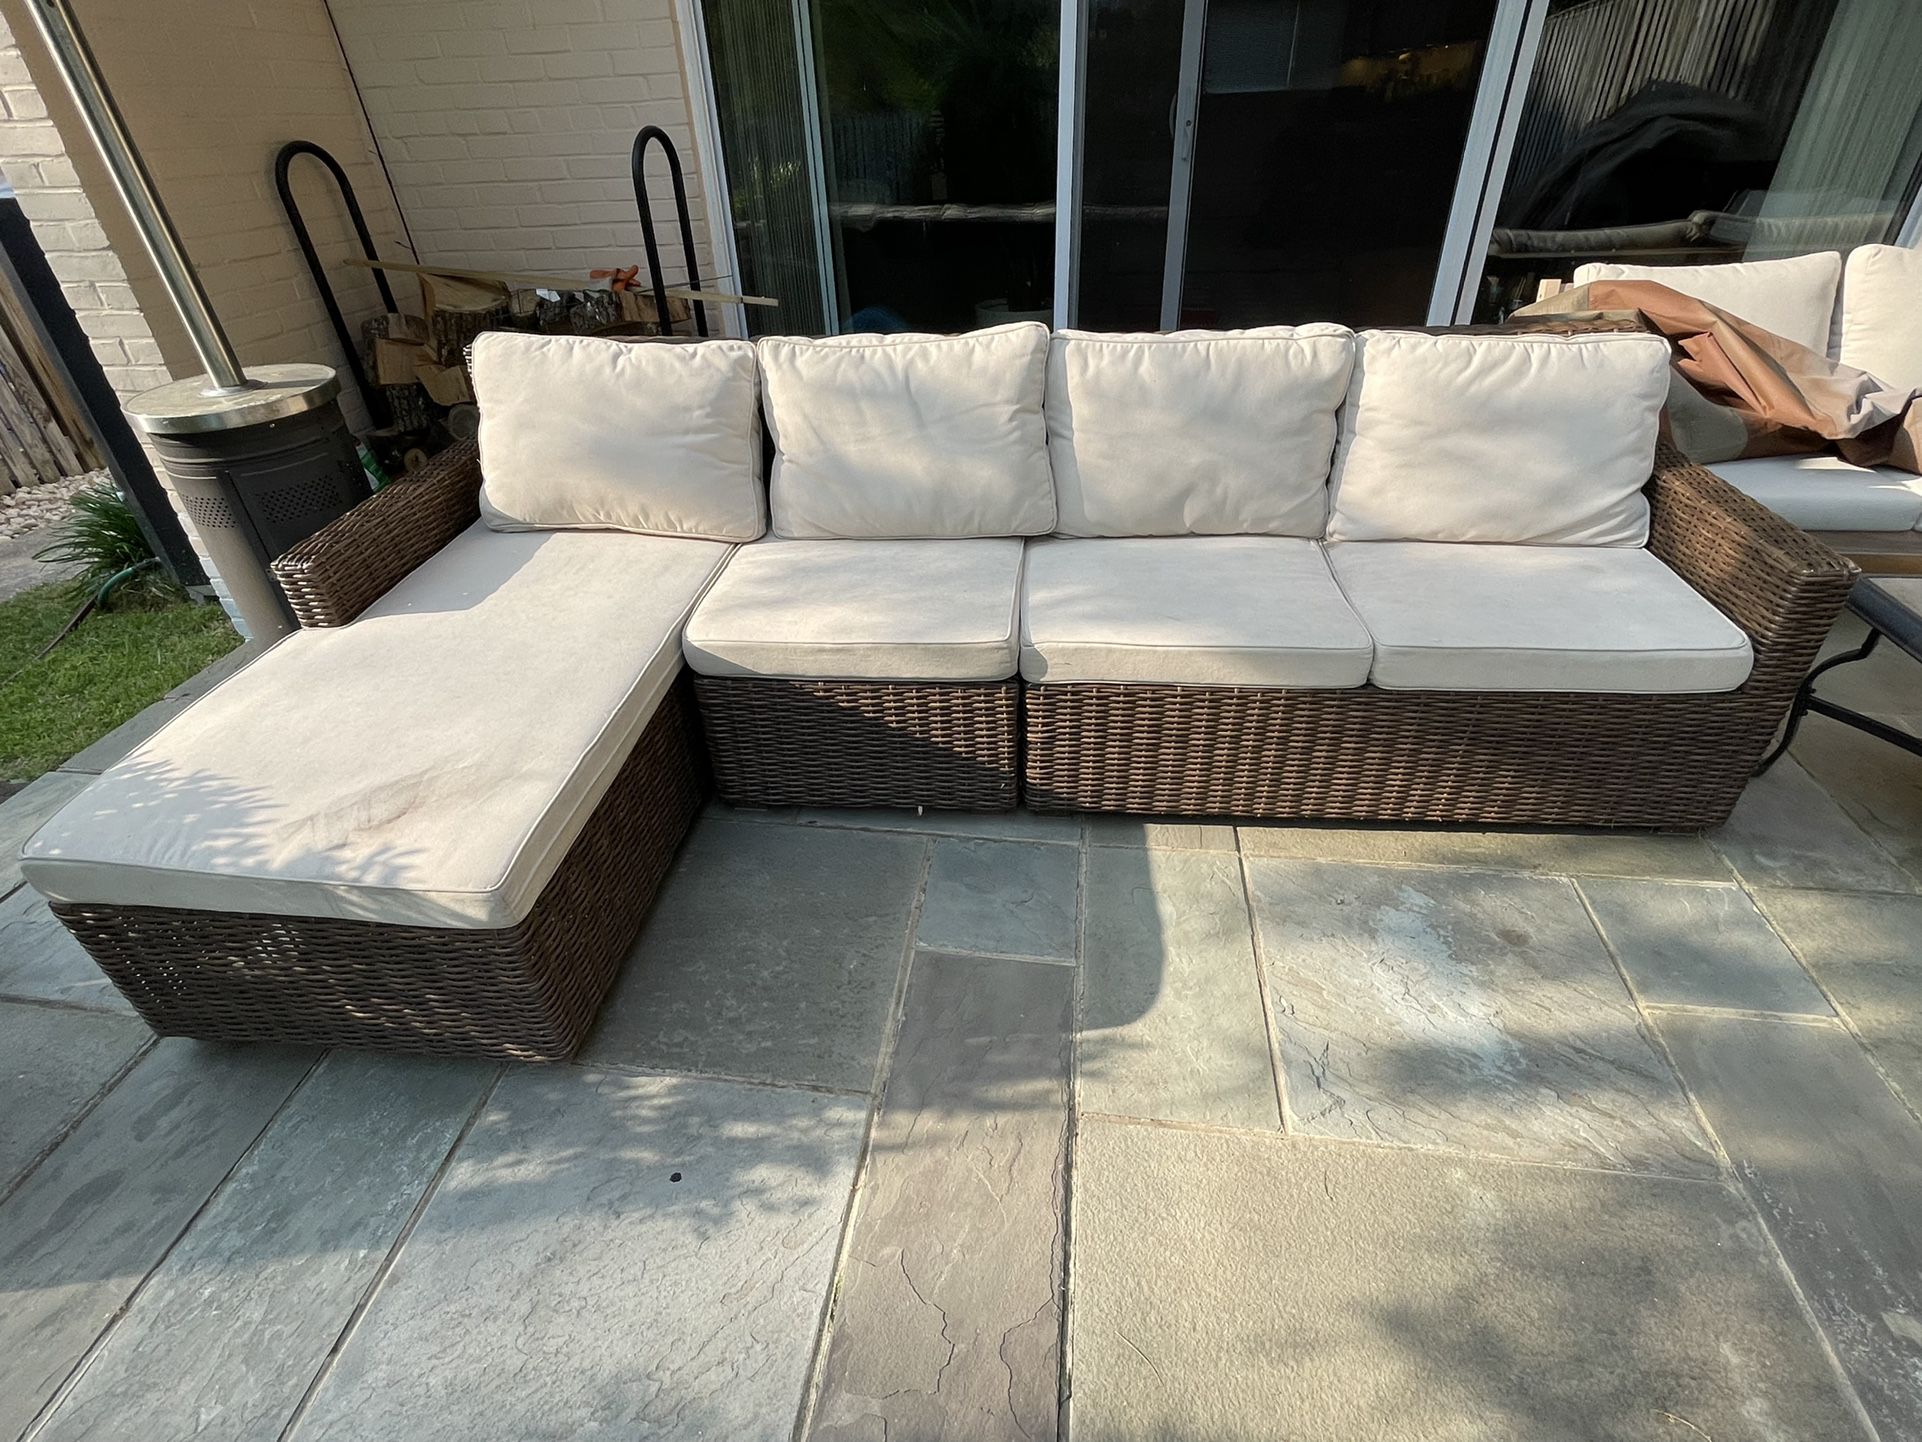 Outdoor Sectional - 3 Piece With Cushions 